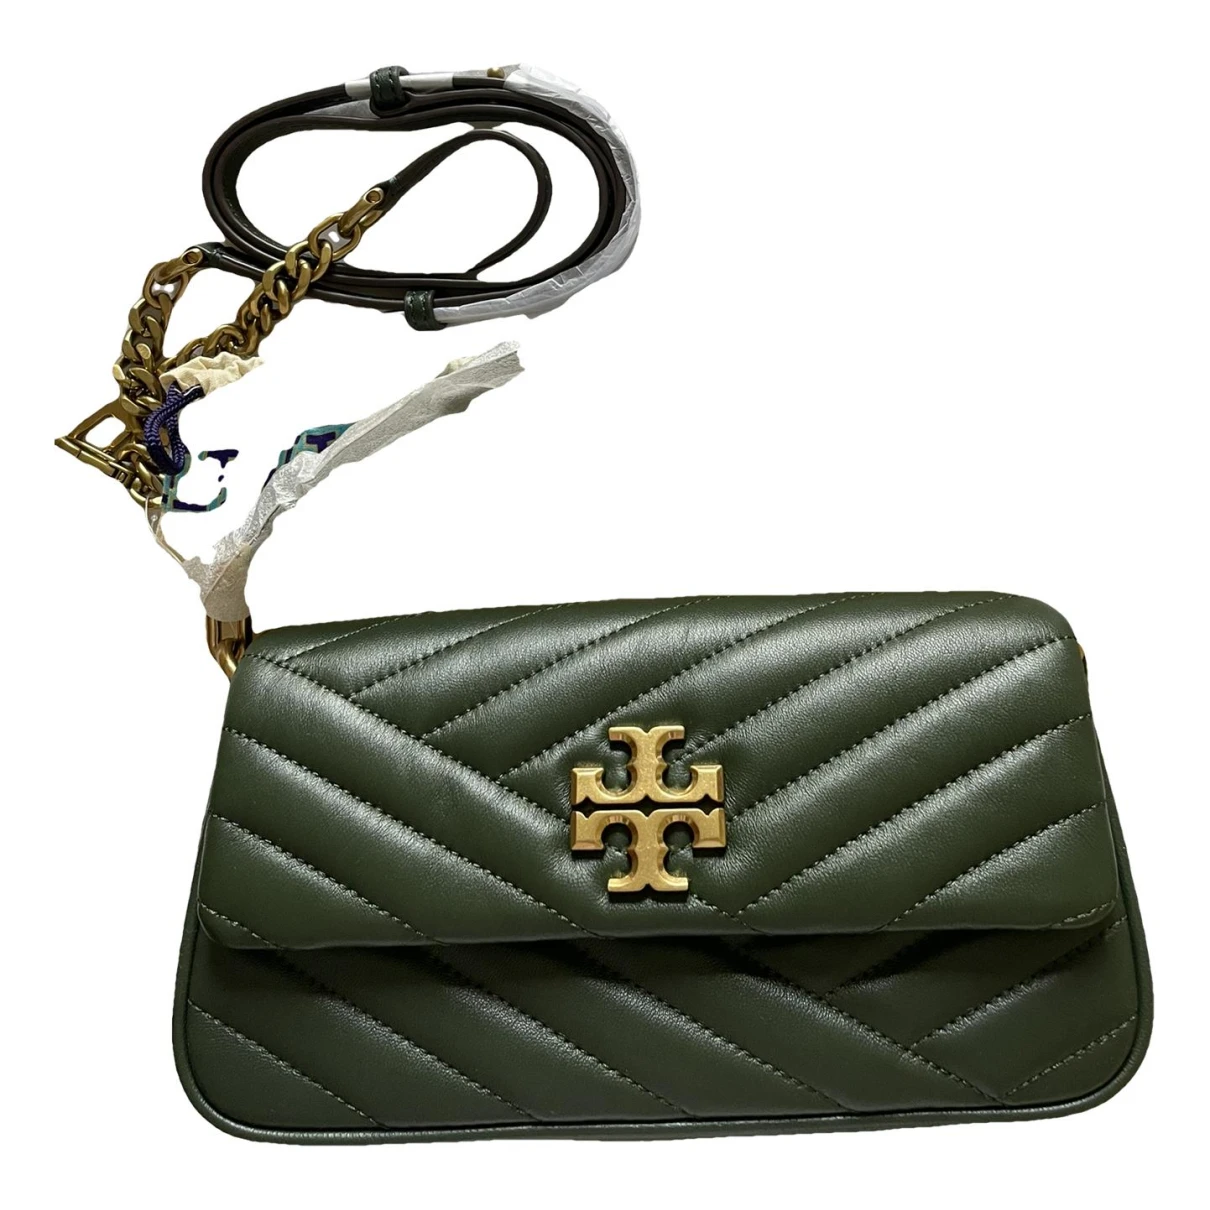 Pre-owned Tory Burch Leather Handbag In Green